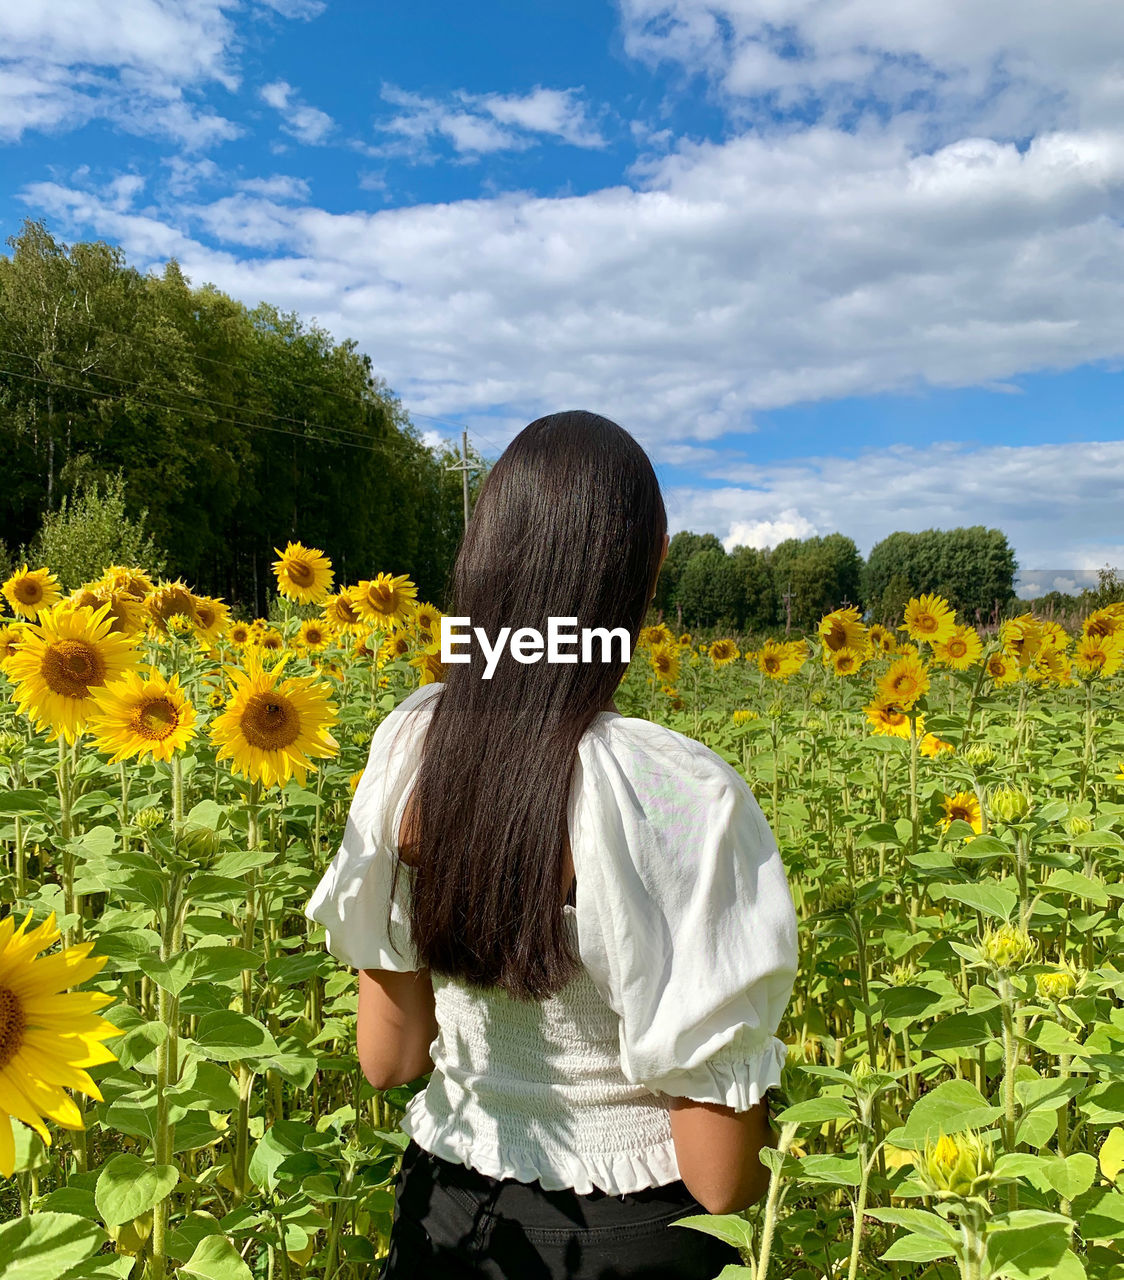 REAR VIEW OF WOMAN STANDING BY SUNFLOWER ON FIELD AGAINST CLOUDY SKY